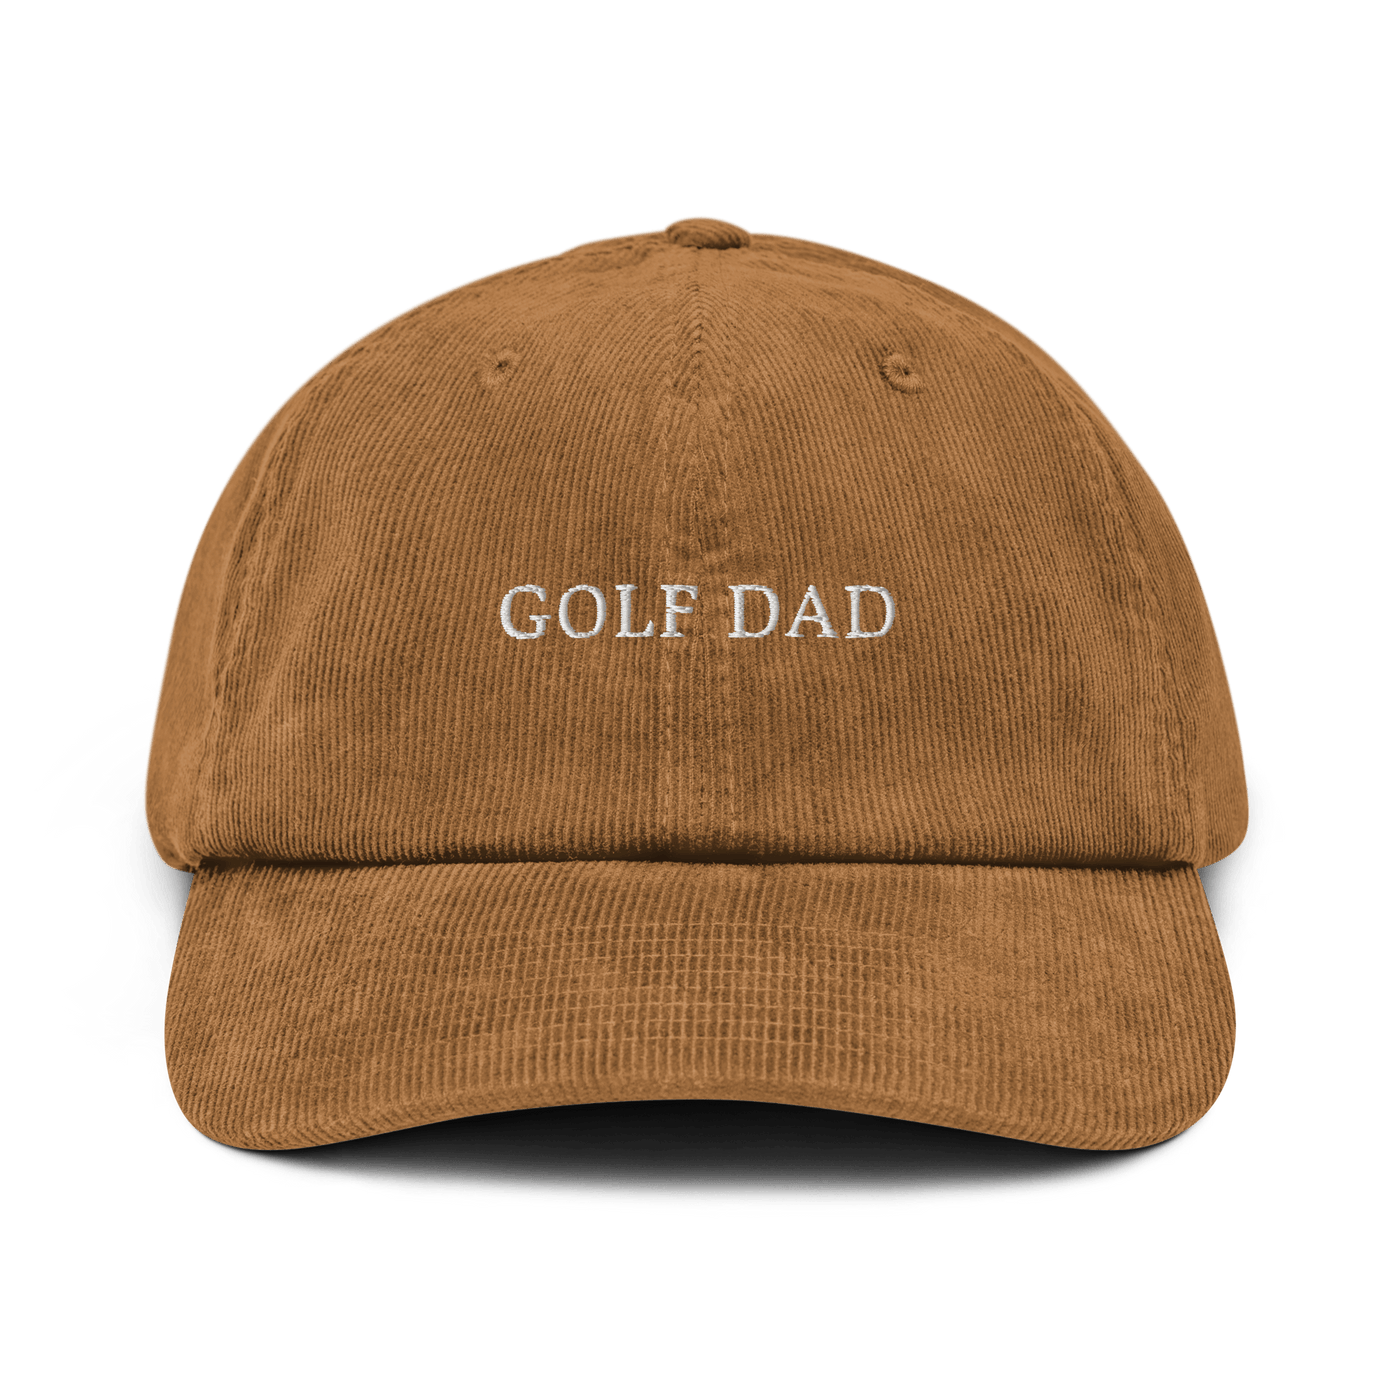 Golf Dad Corduroy hat - Camel - - Just Another Cap Store